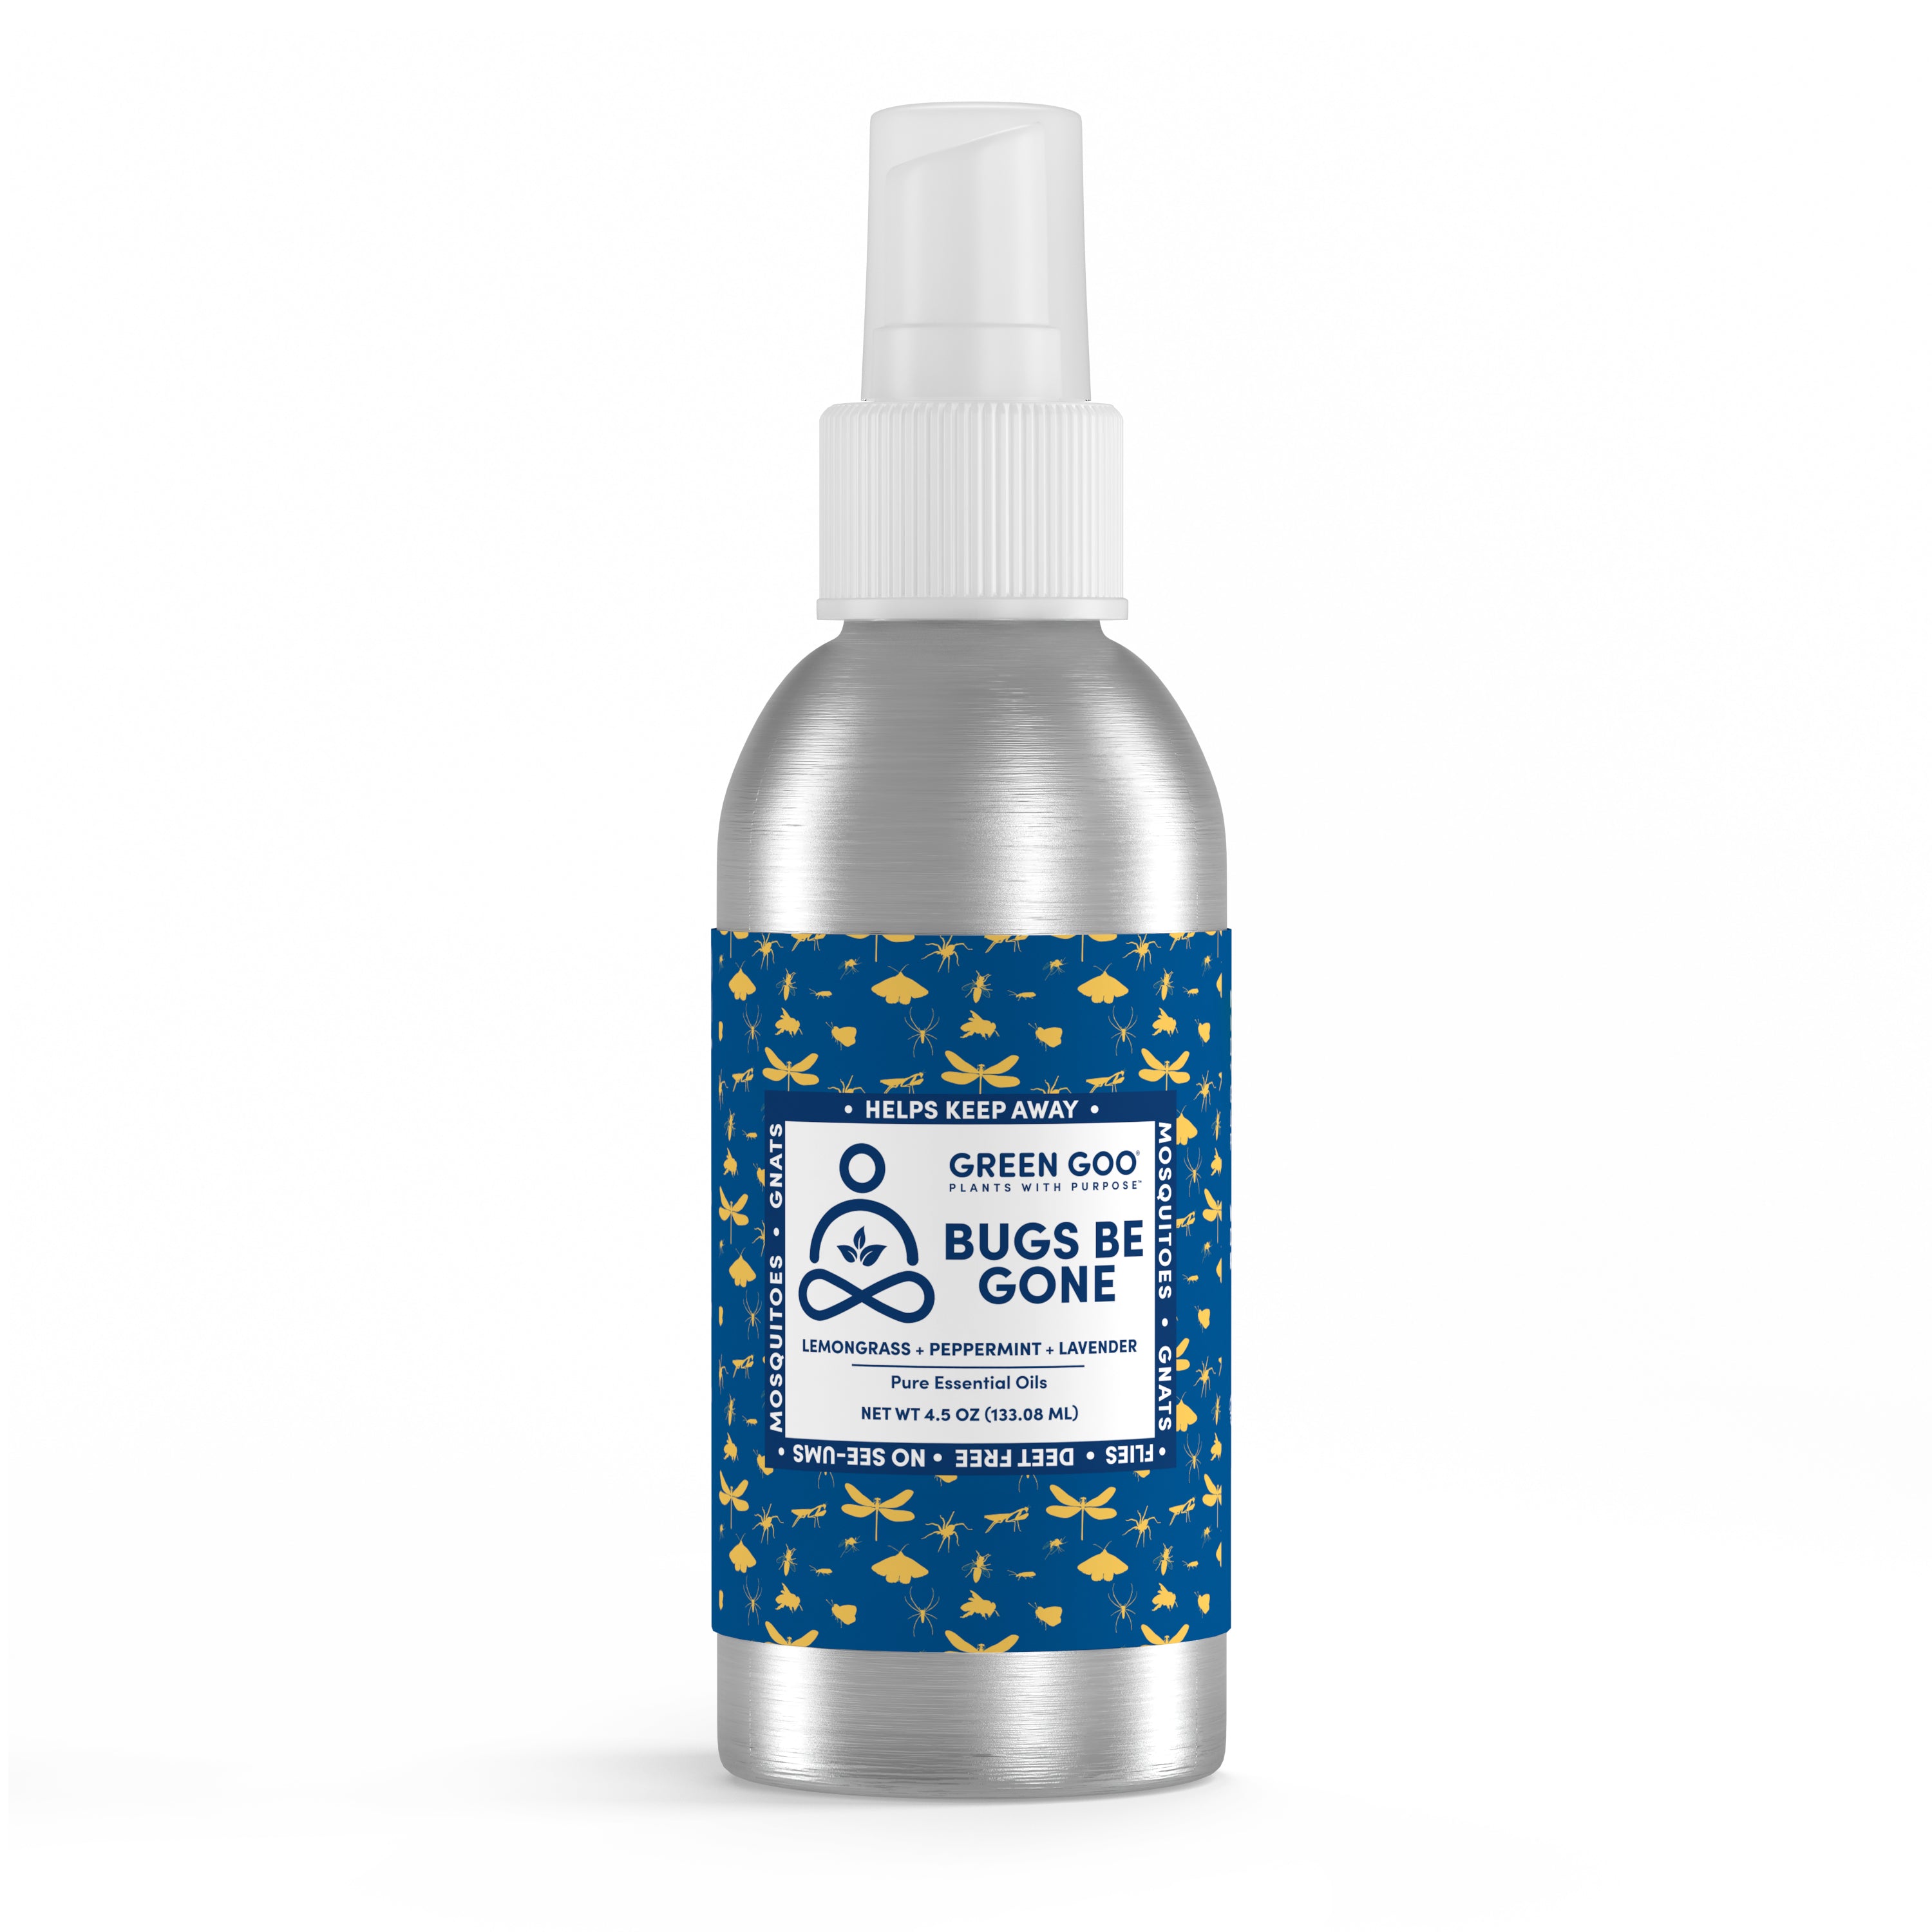 Bugs be Gone Insect repellant for Dogs & Cats (7860187234546)